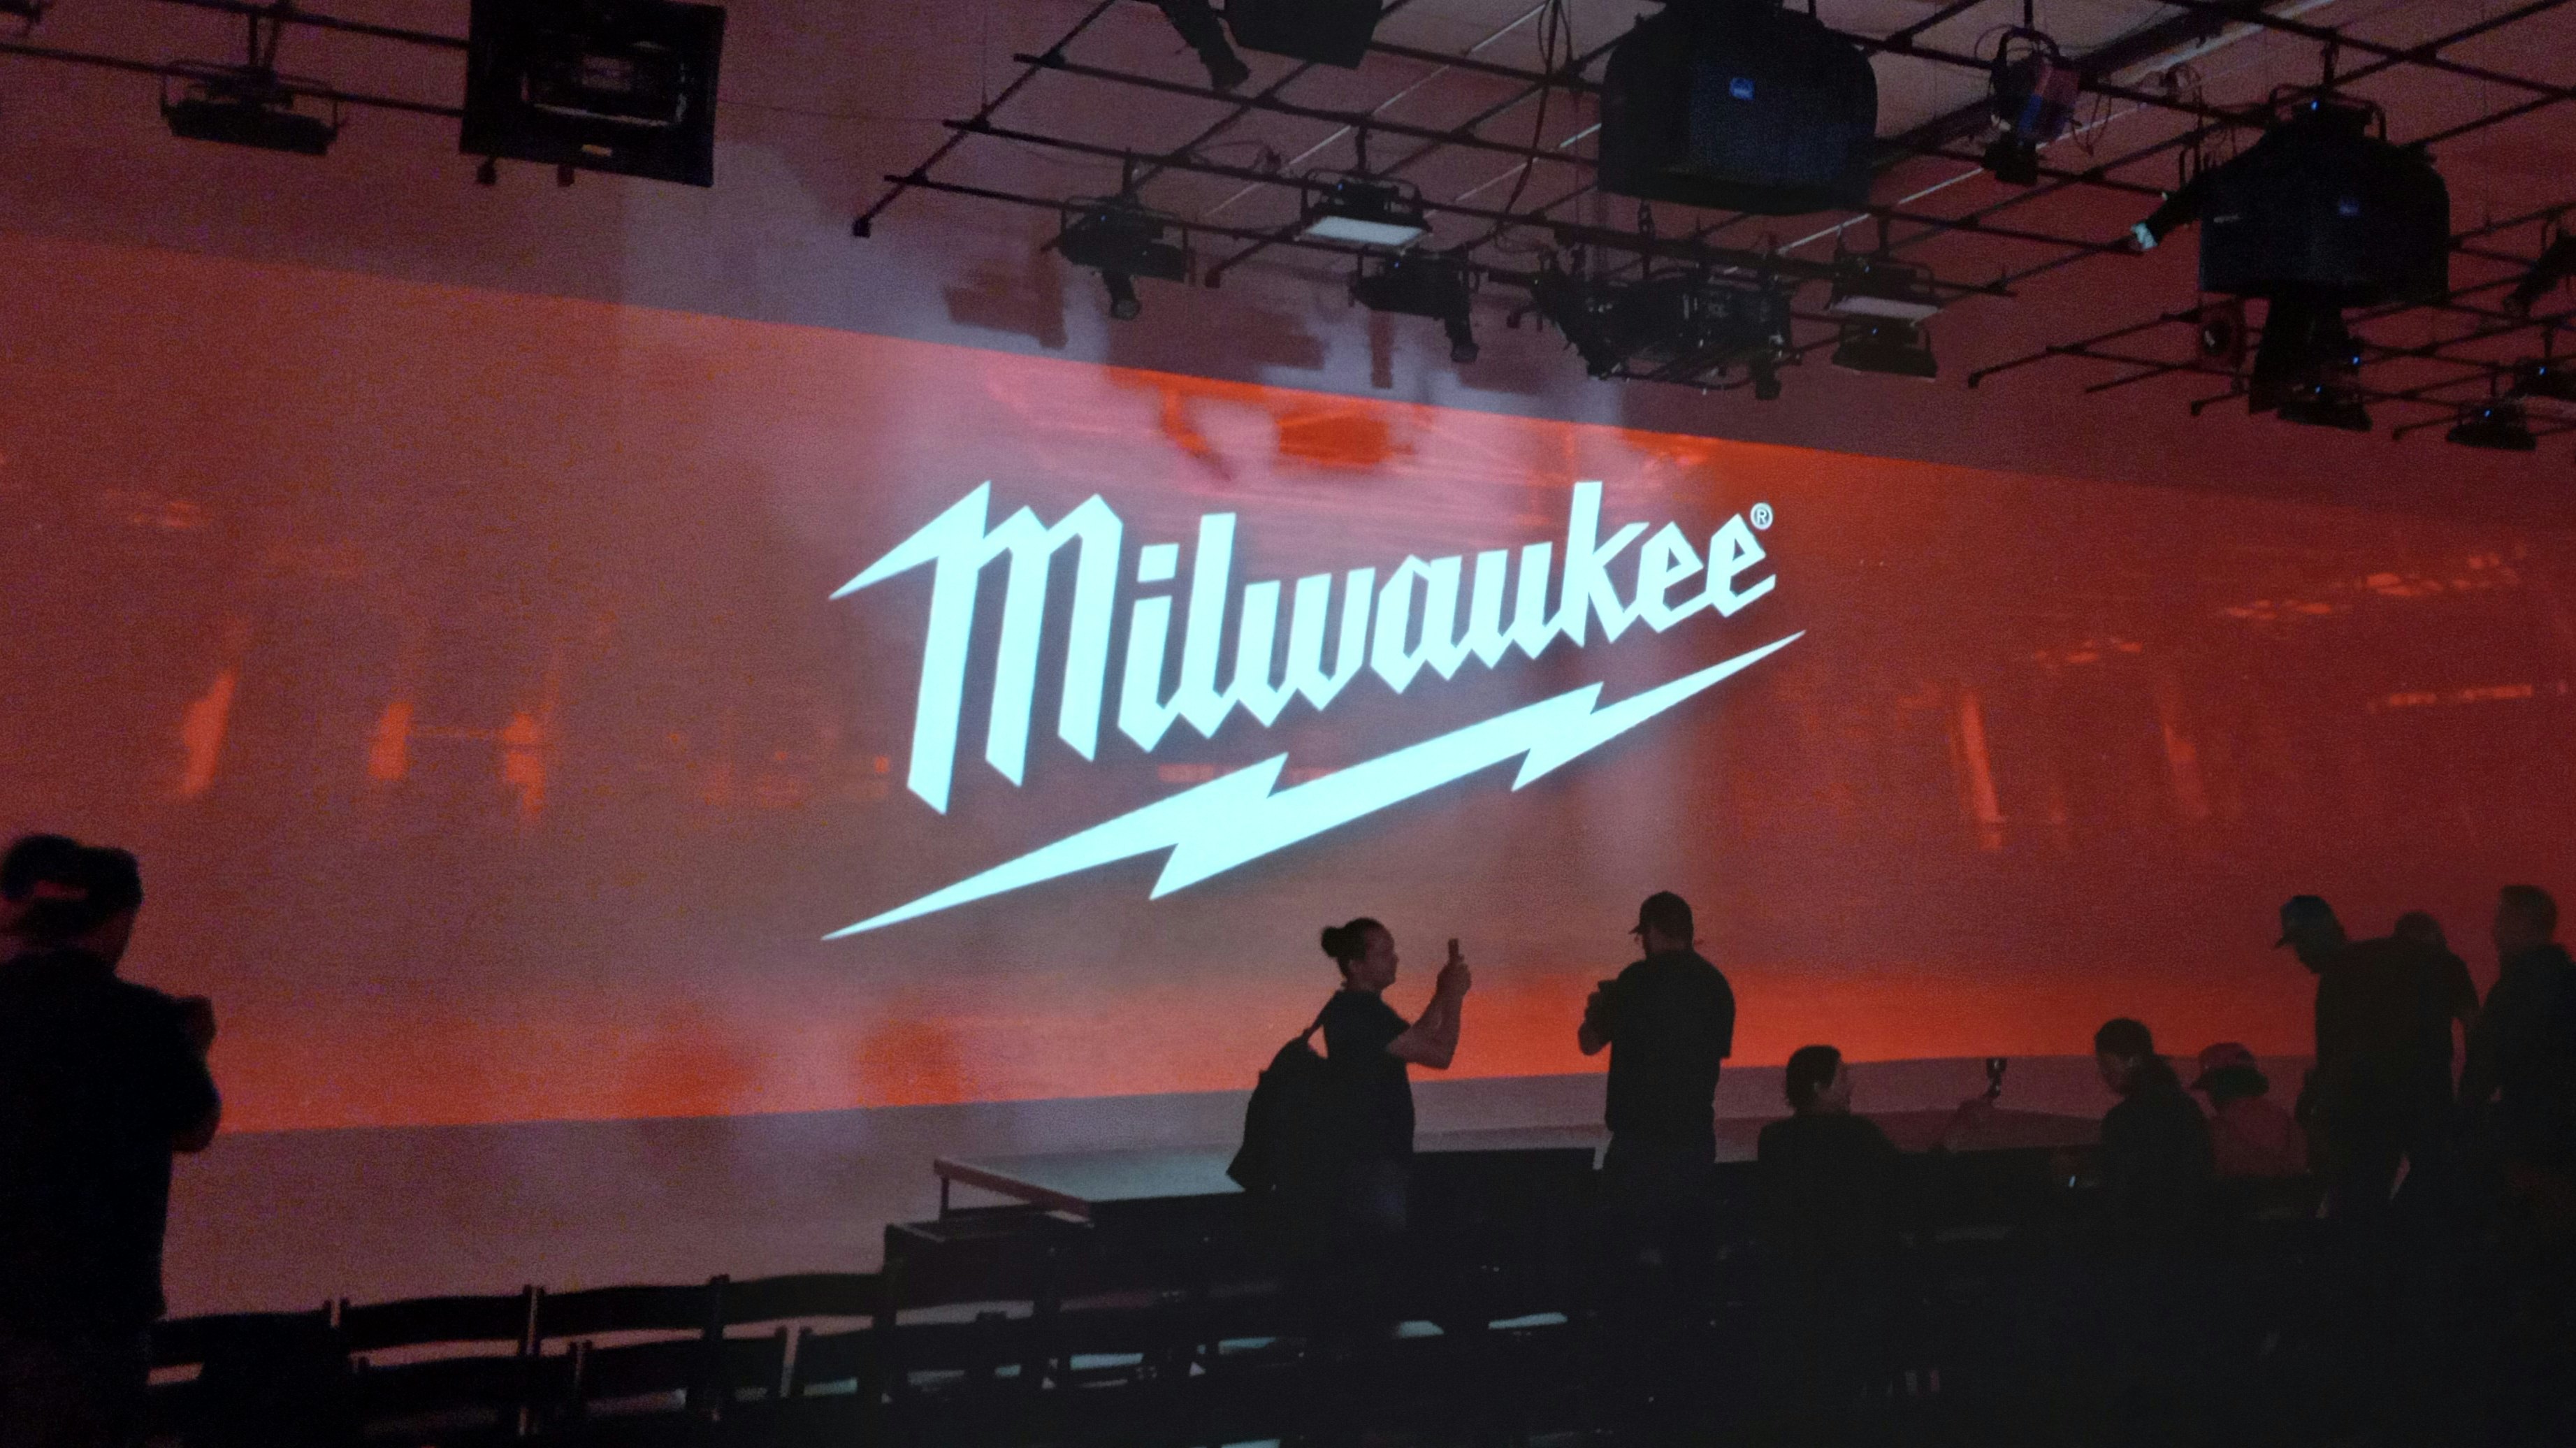 New Milwaukee tools 2023: M18 Fuel, ratchets, pruners, and more